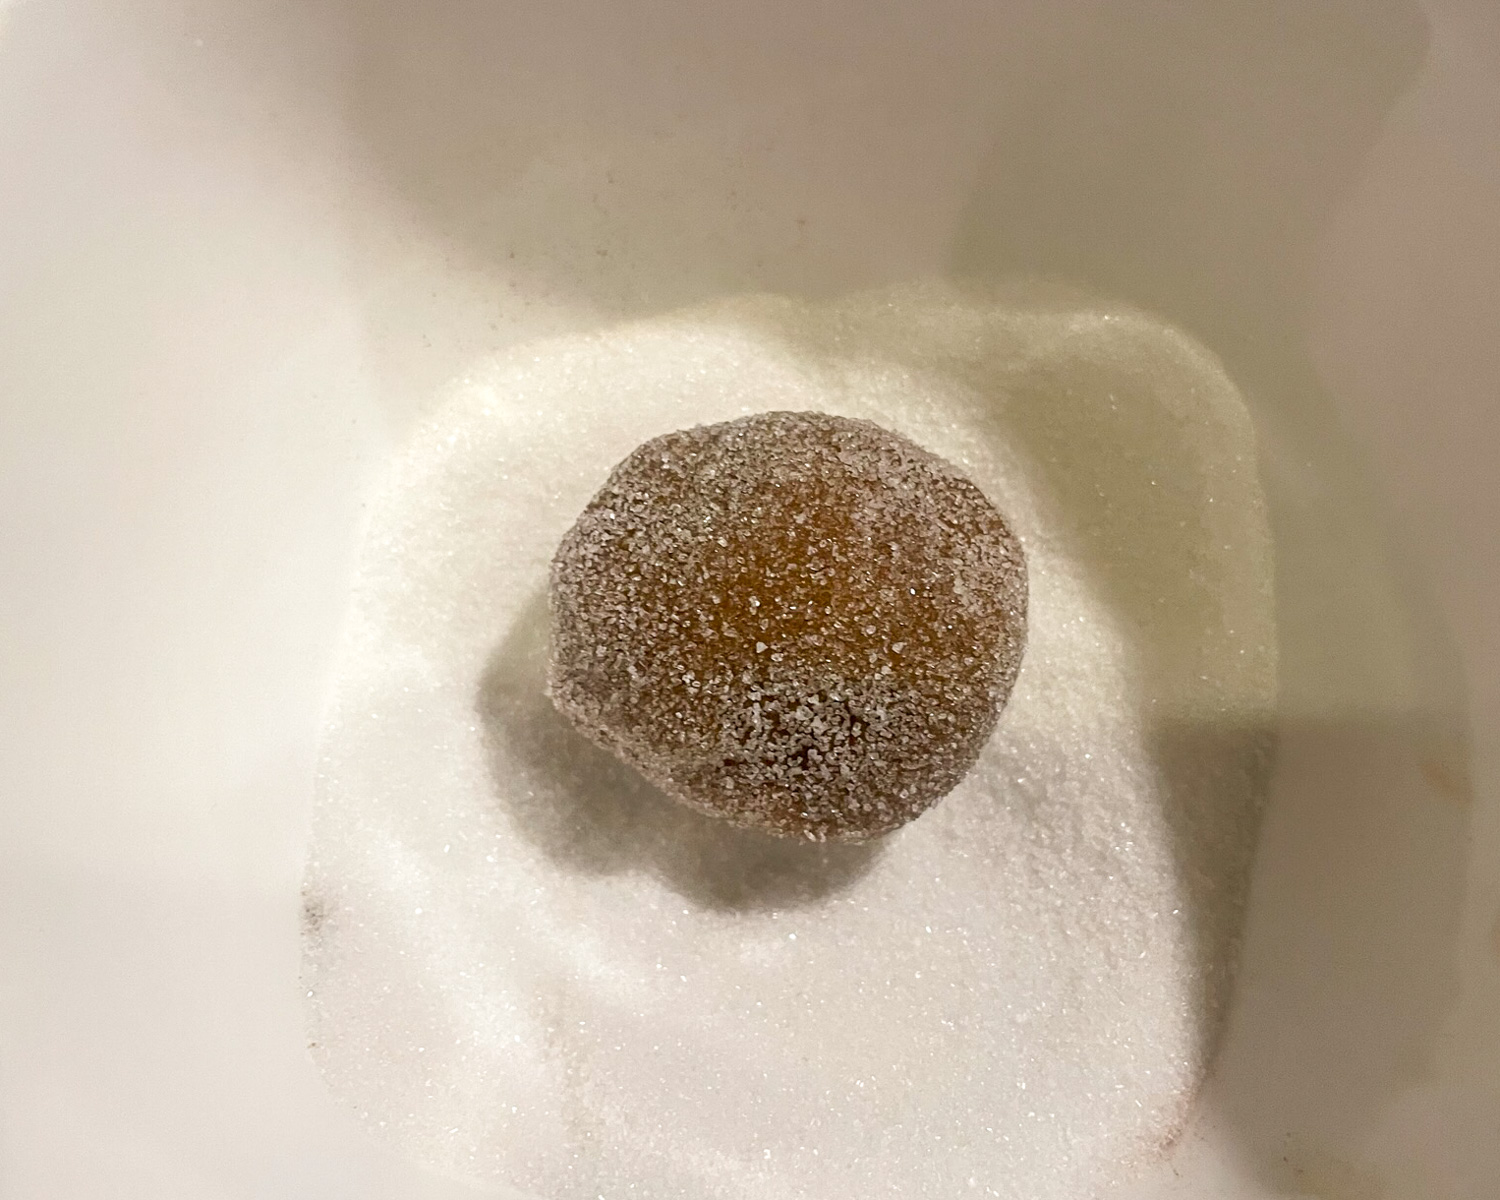 One uncooked cookie being coated in white sugar